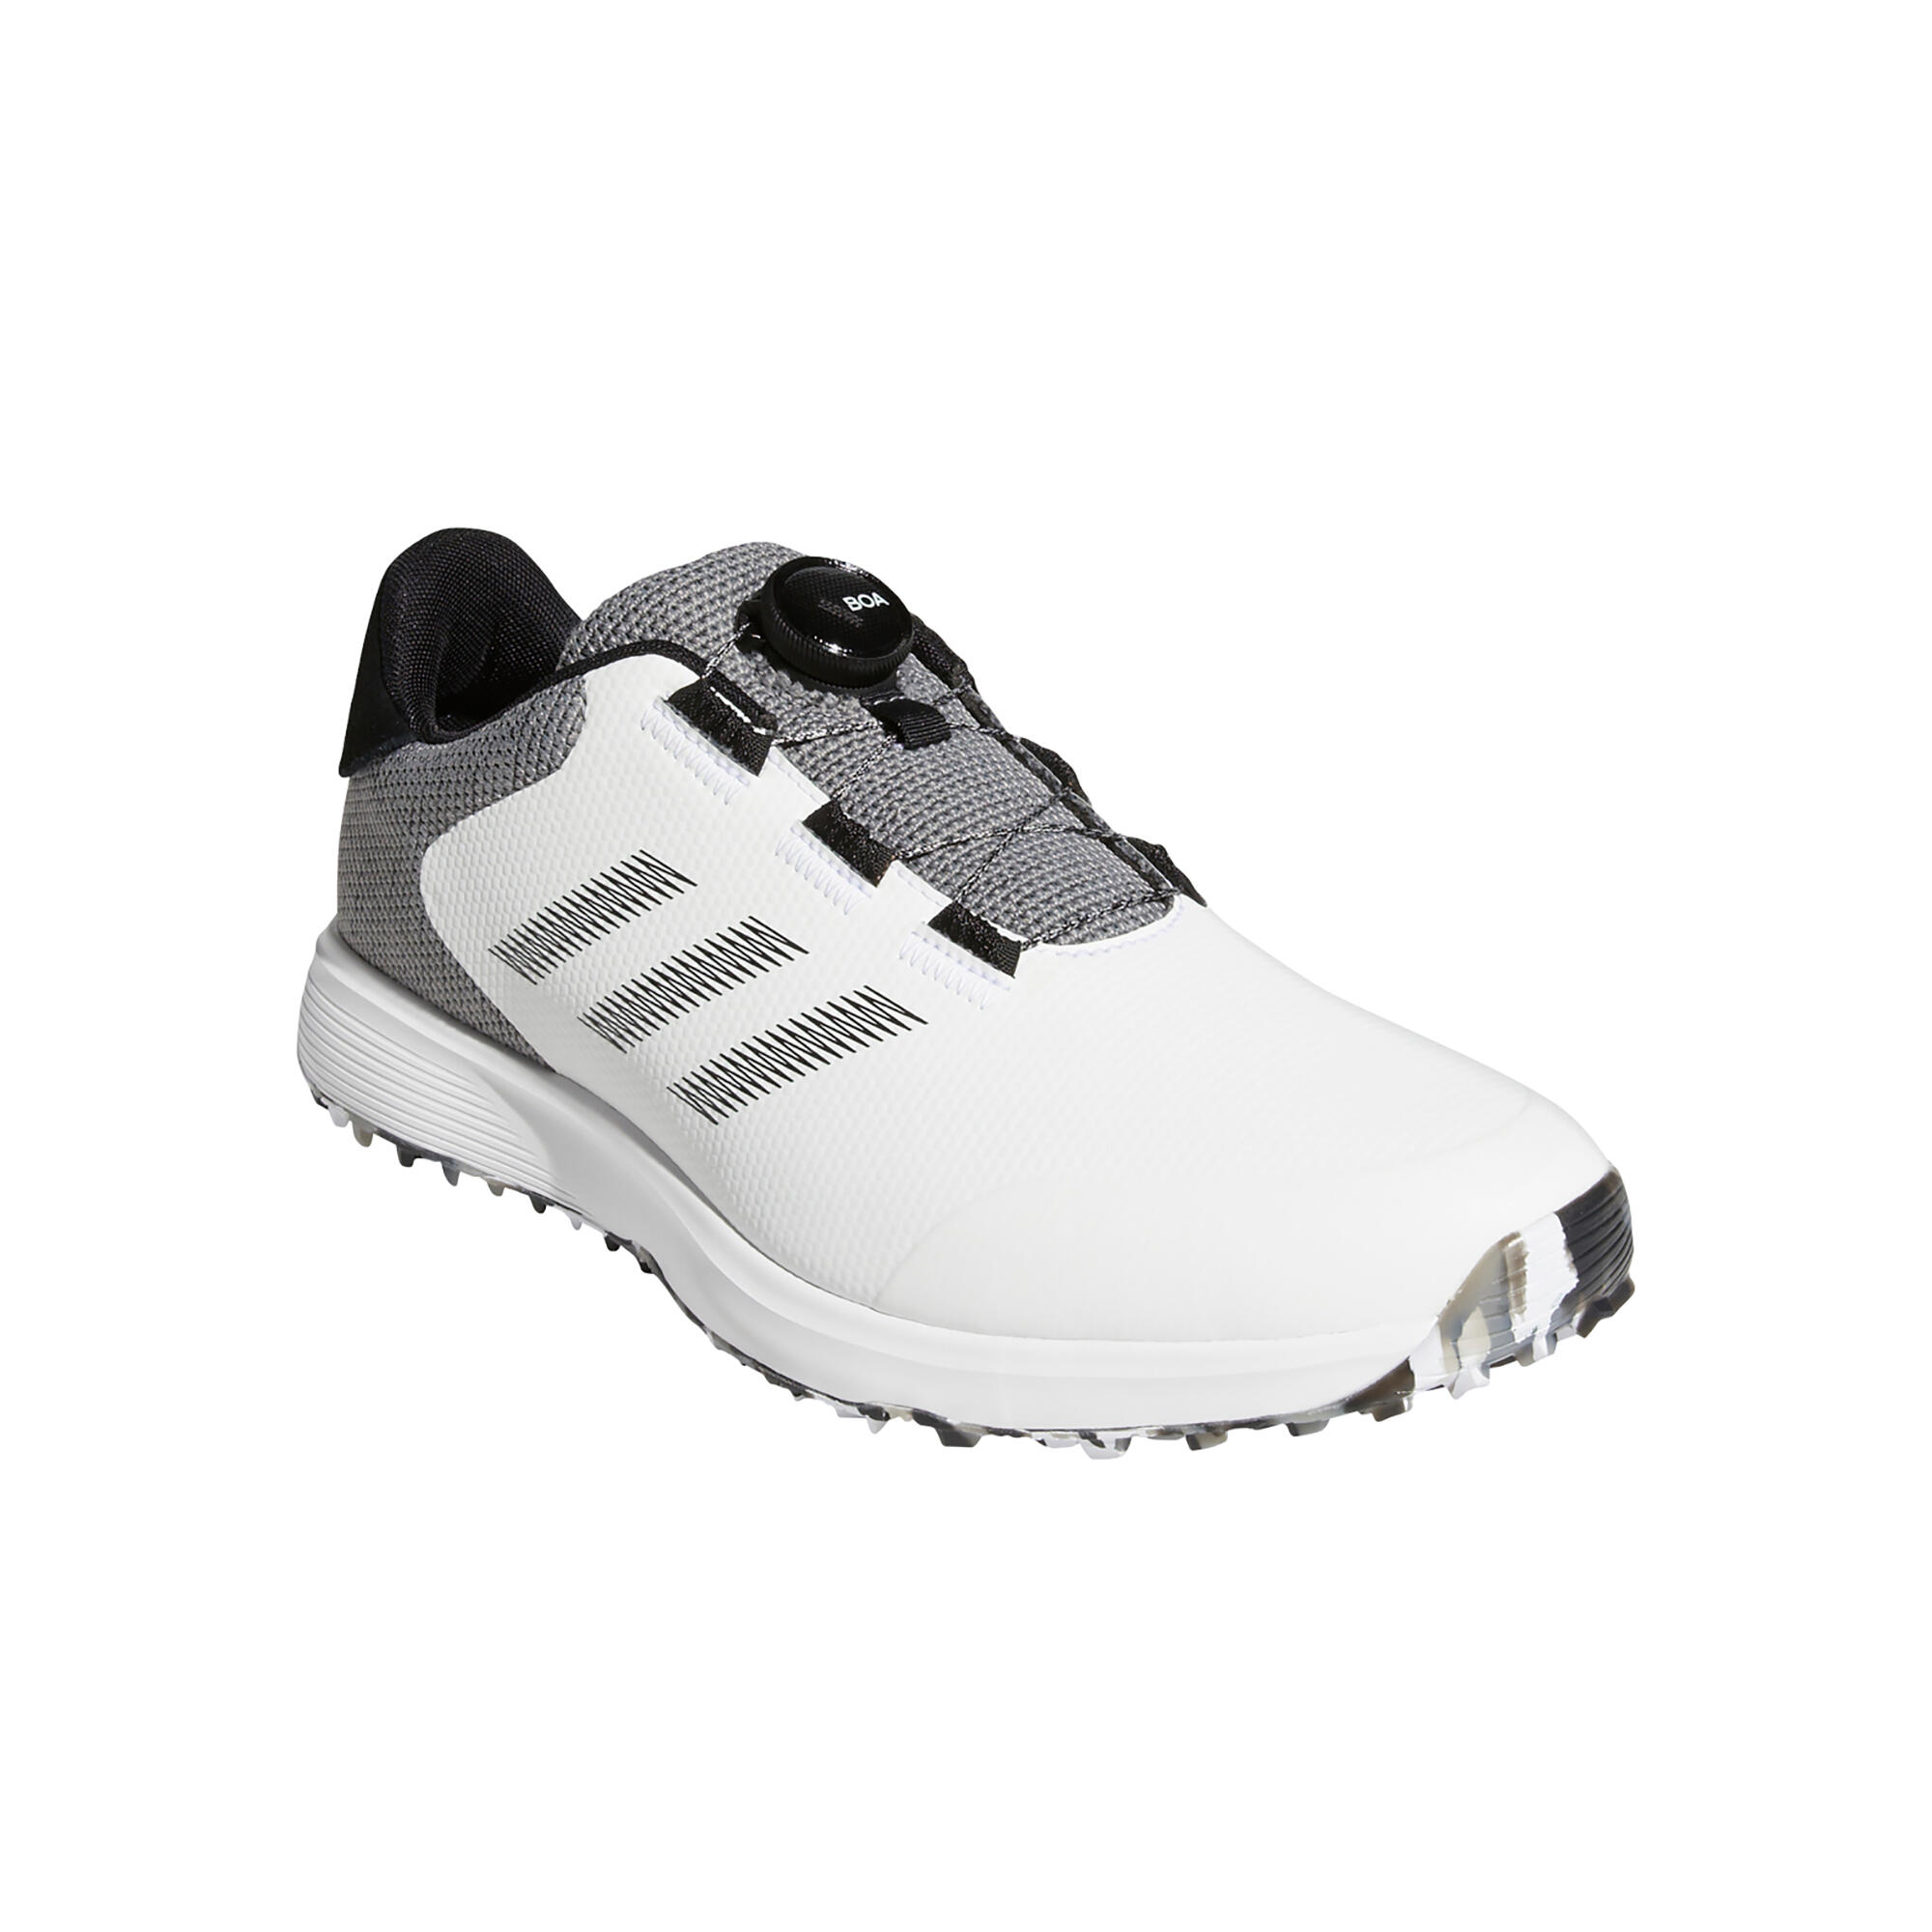 Zapatos Golf S2G Slboa Hombre Blancos Impermeables هواوي  سعر